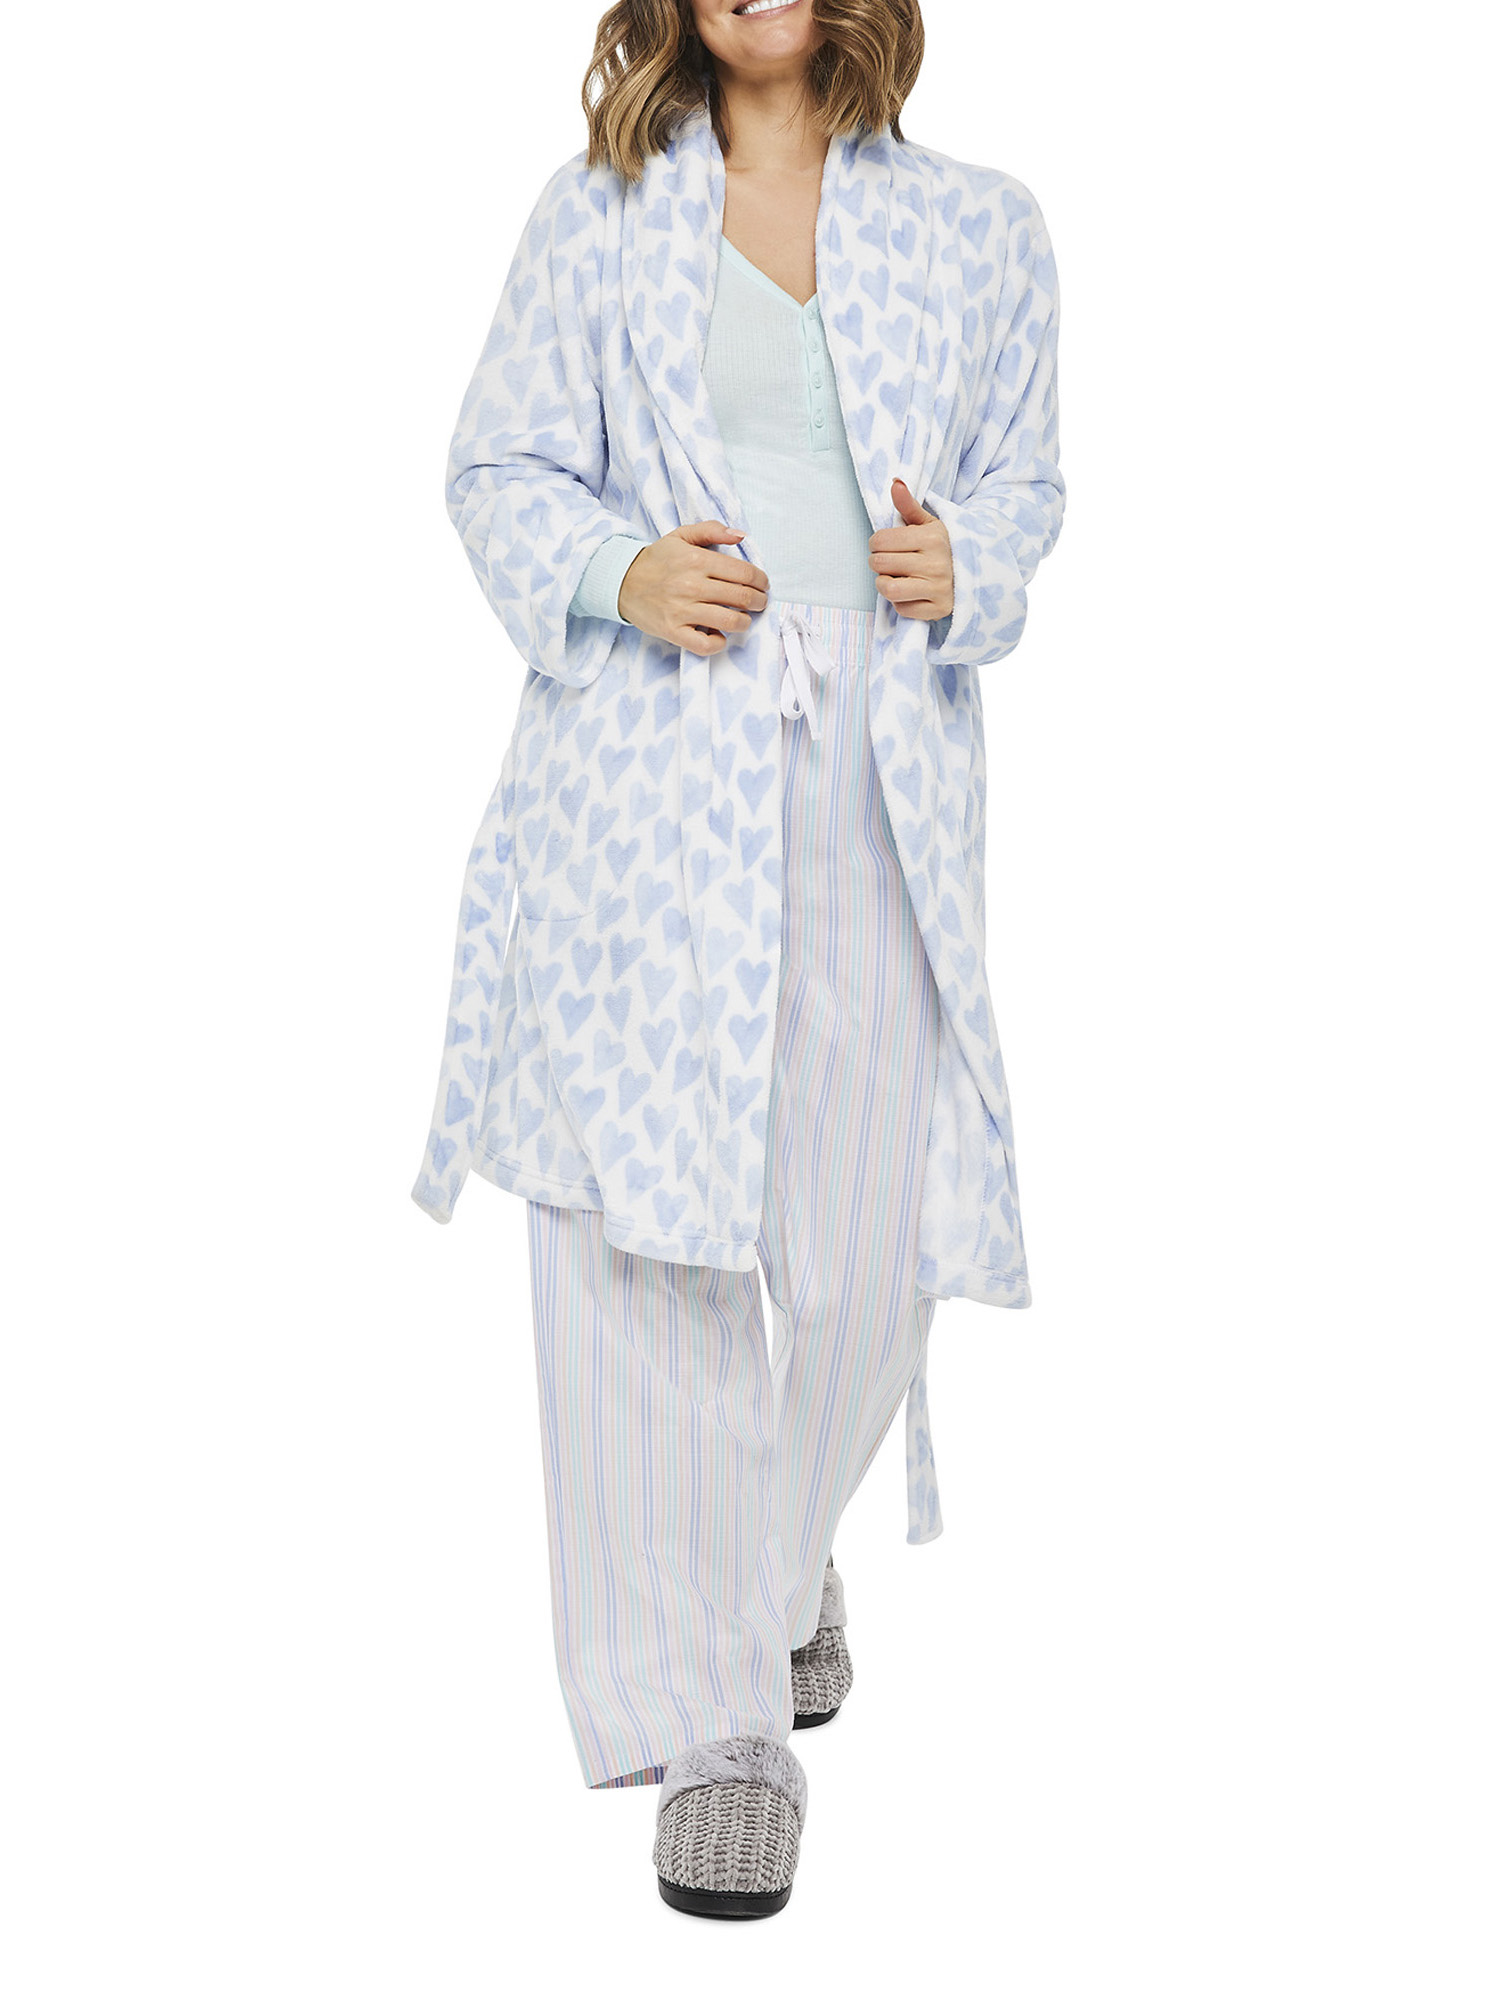 GEORGE Hearts Afternoon Polyester Robe (Women's or Women's Plus) 1 Pack - image 3 of 7